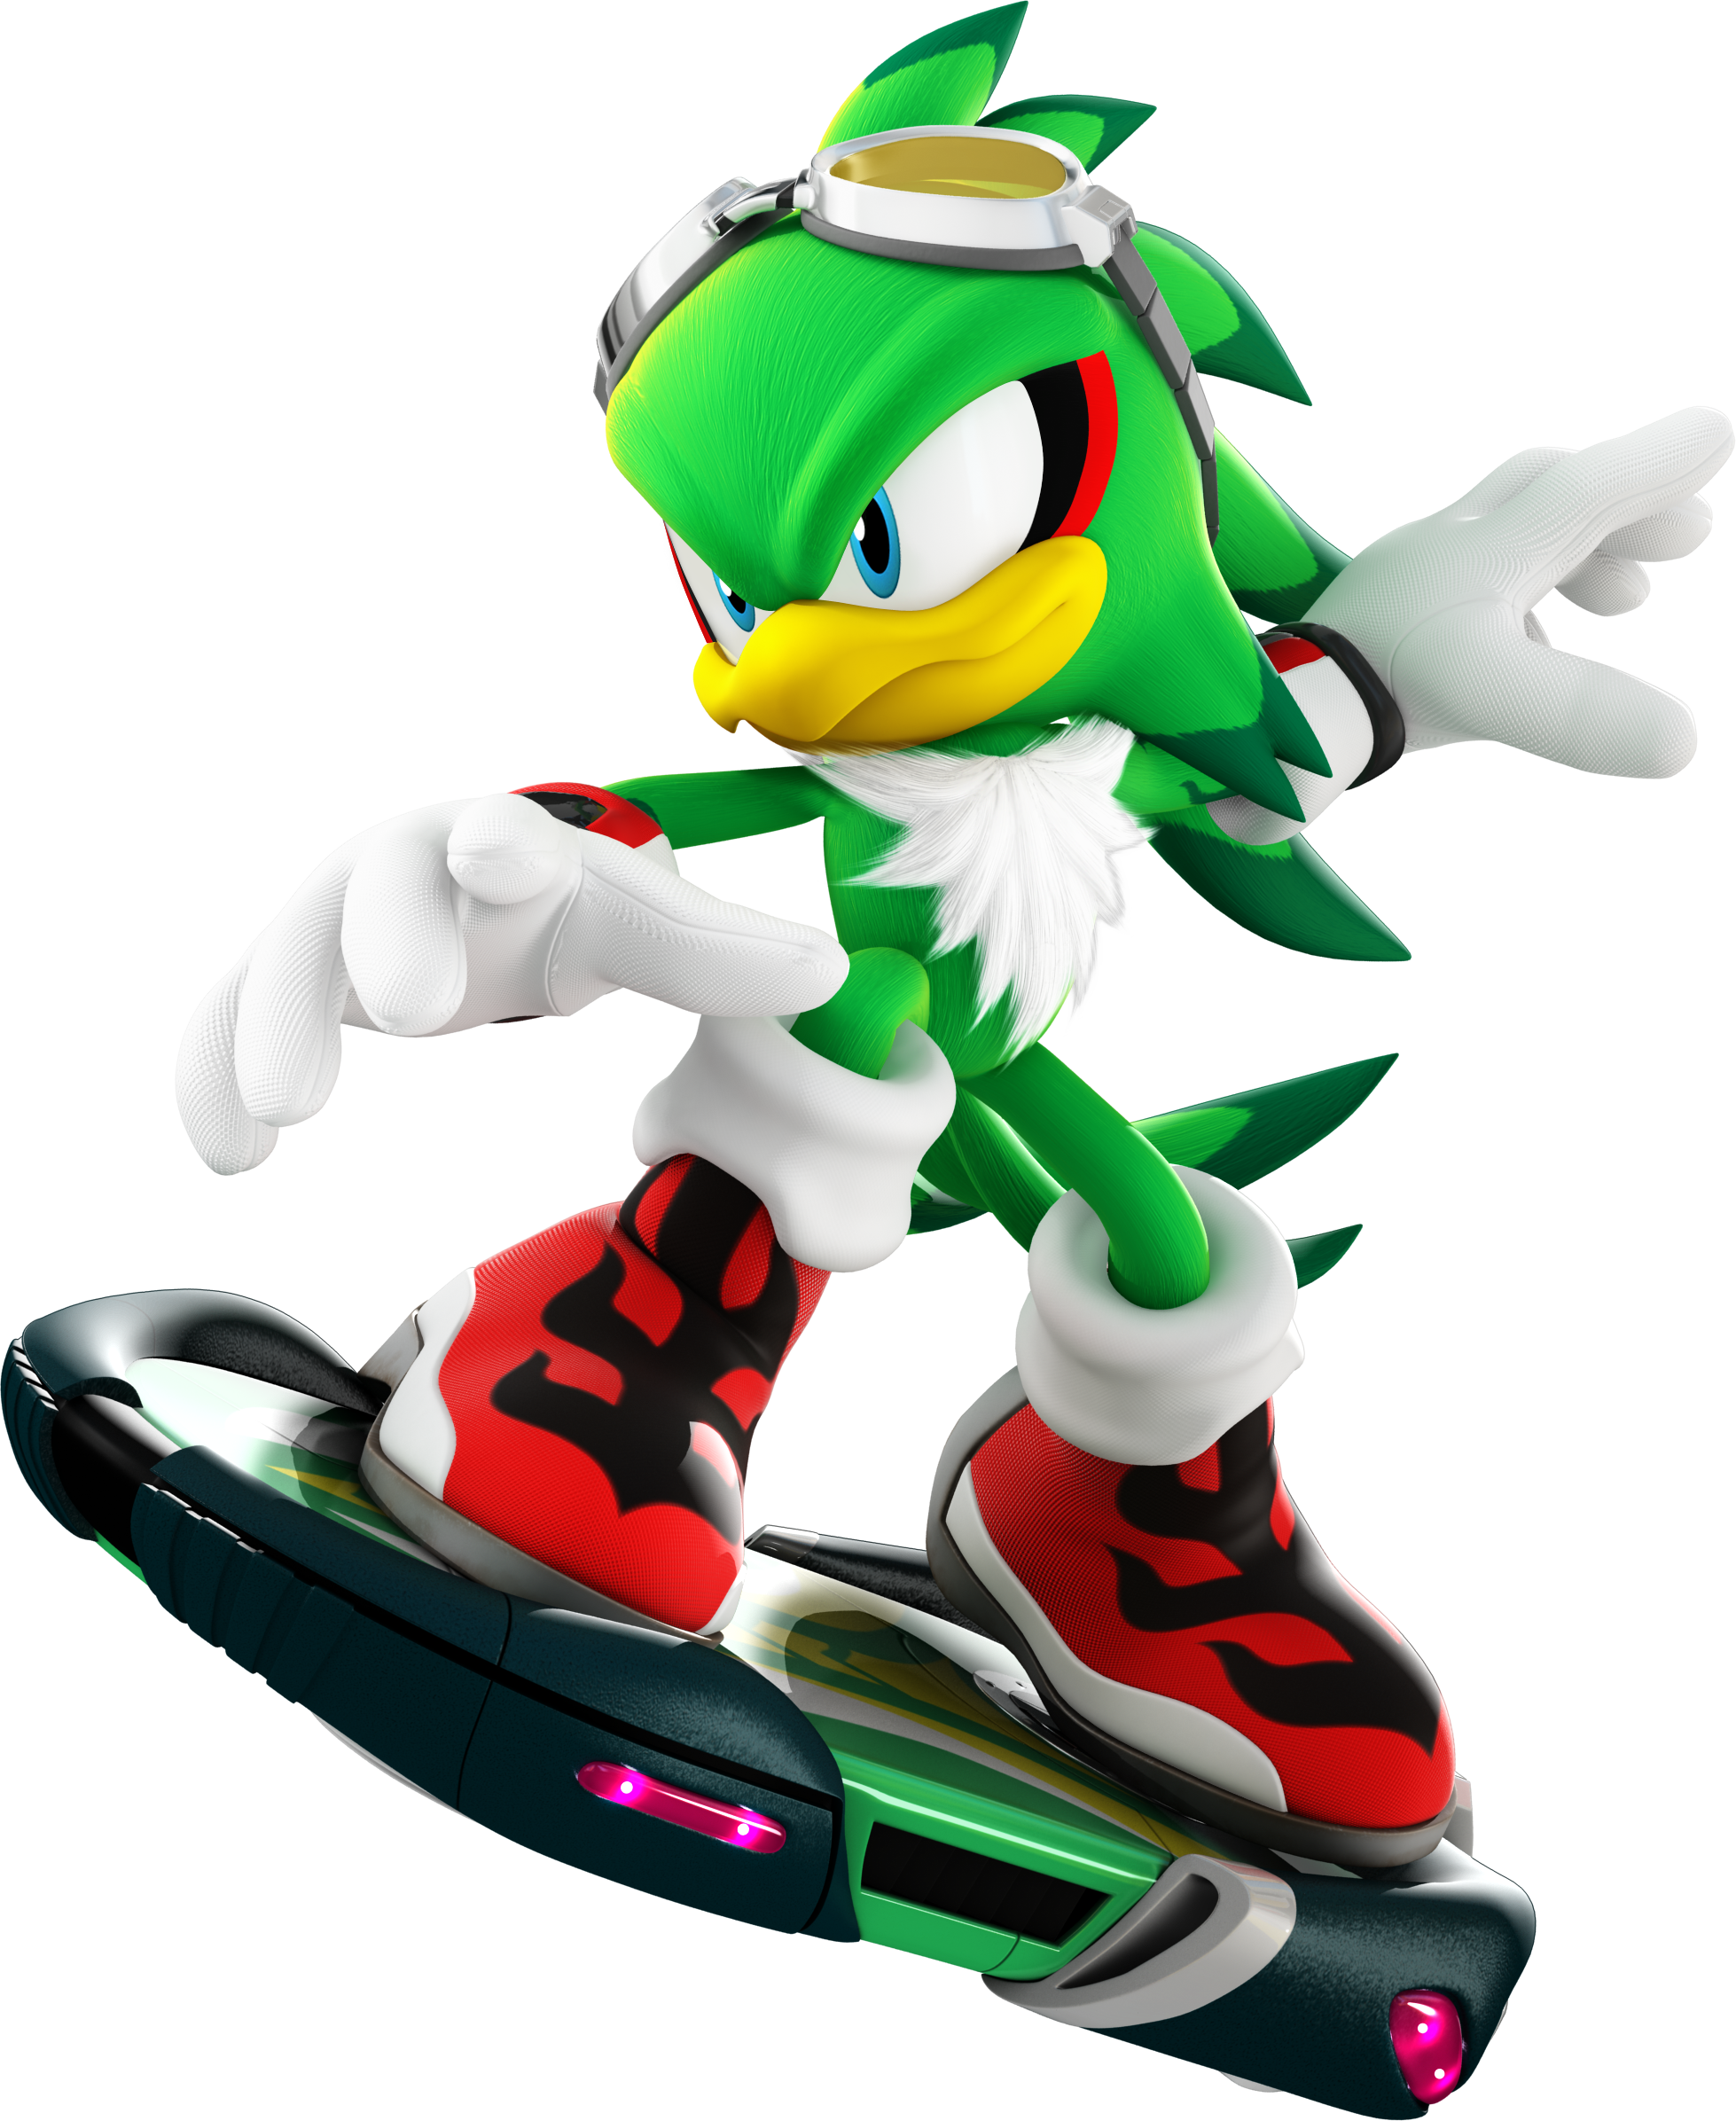 download free shadow sonic free riders